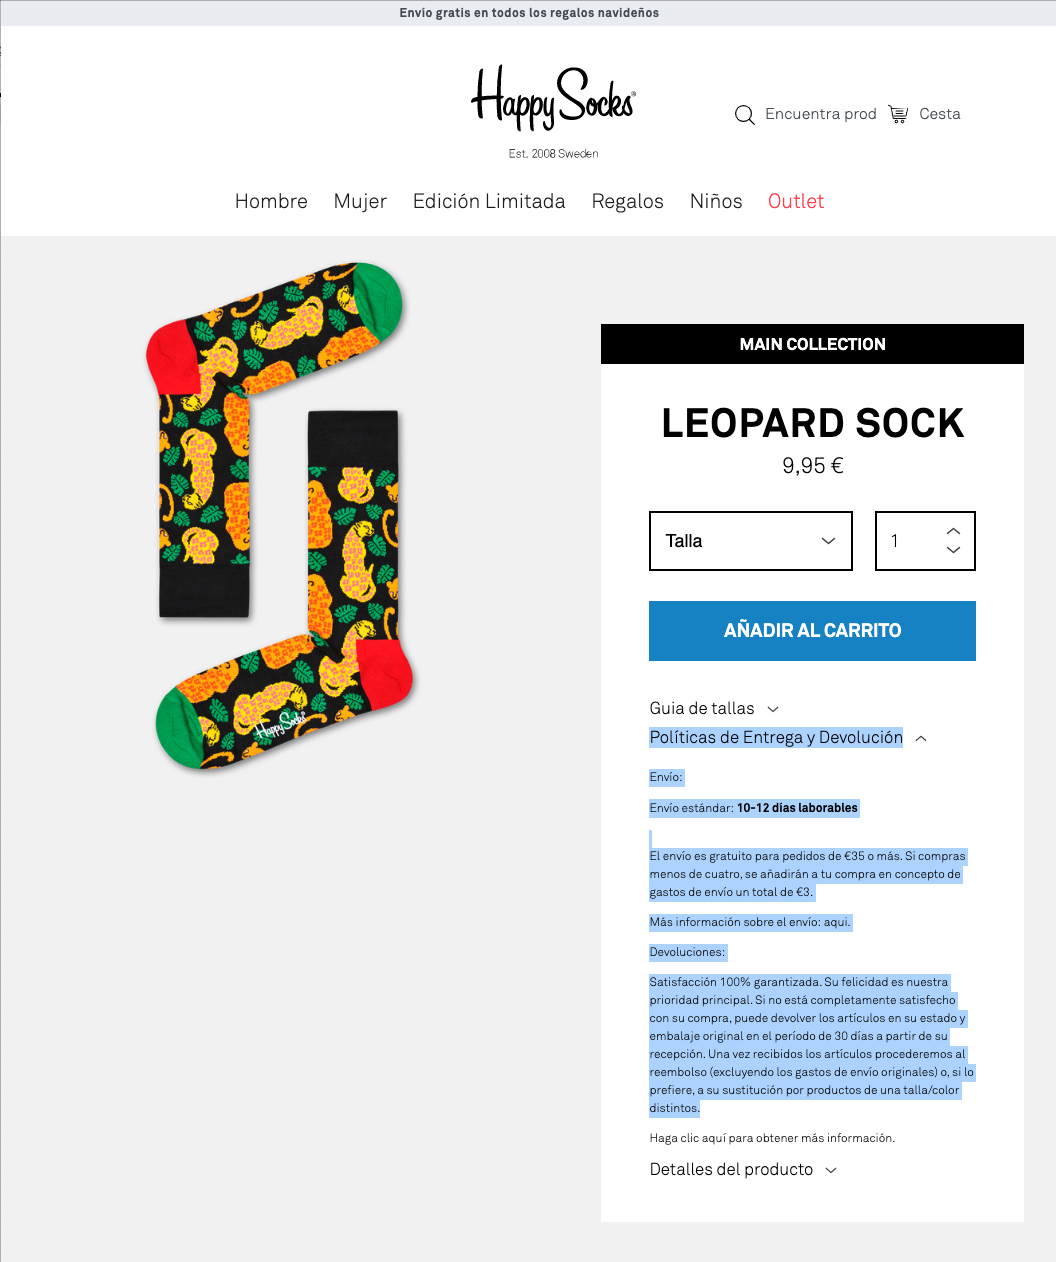 Optimizing HappySocks product page - Delivery and return